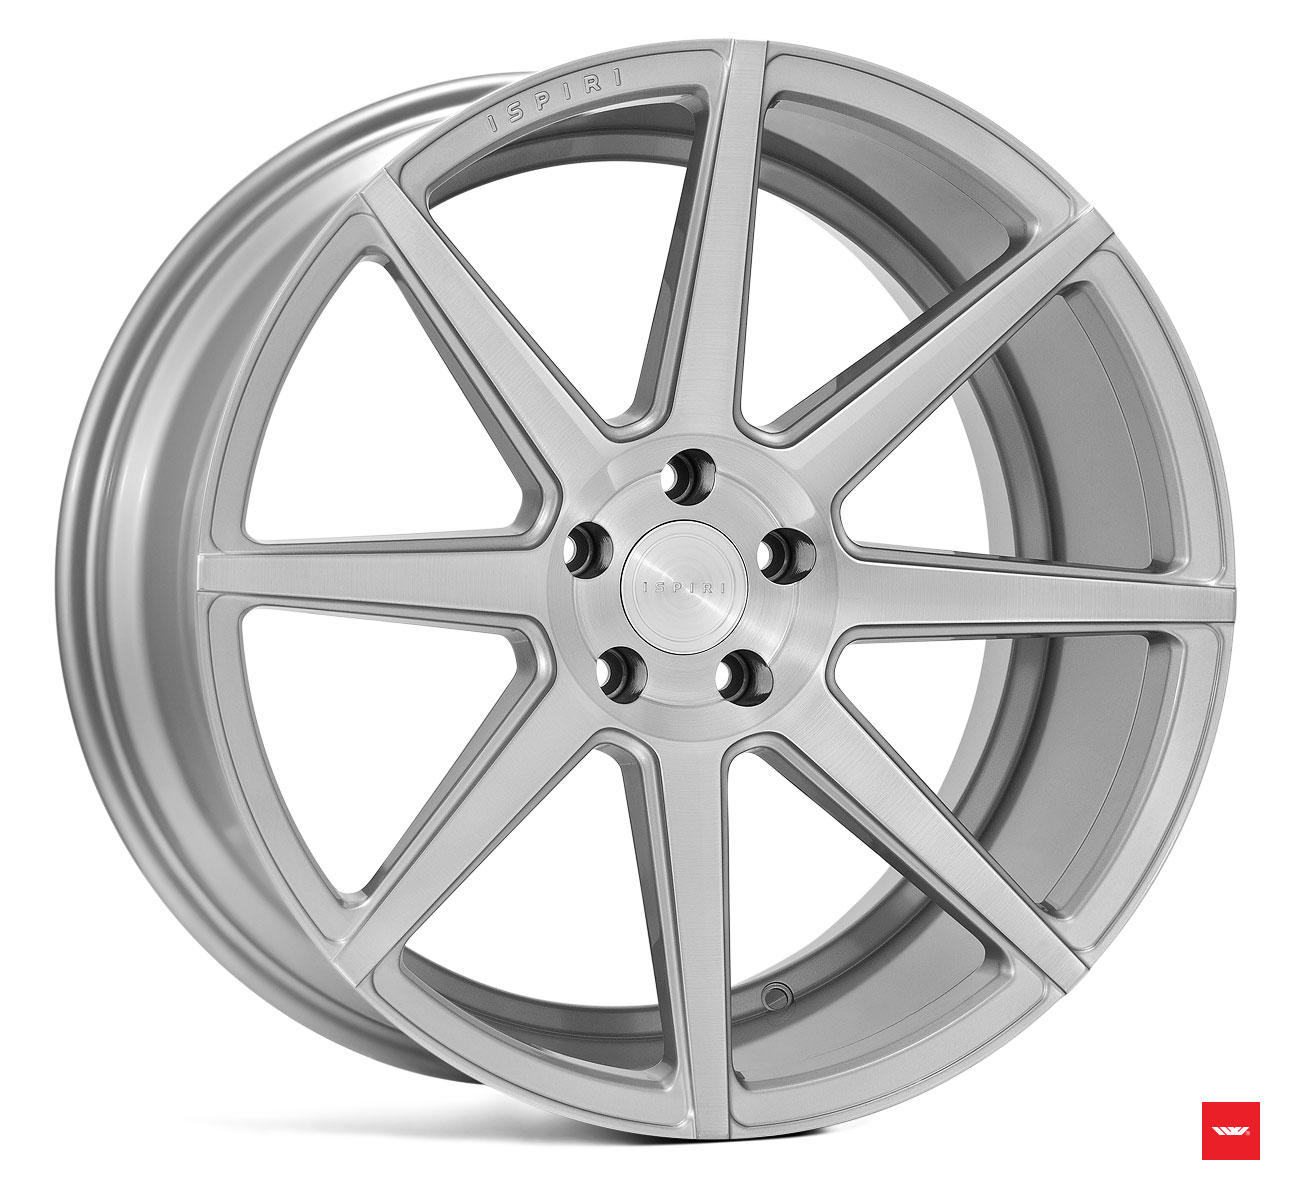 NEW 20" ISPIRI ISR8 ALLOY WHEELS IN PURE SILVER BRUSHED WITH DEEPER CONCAVE 10.5" REARS